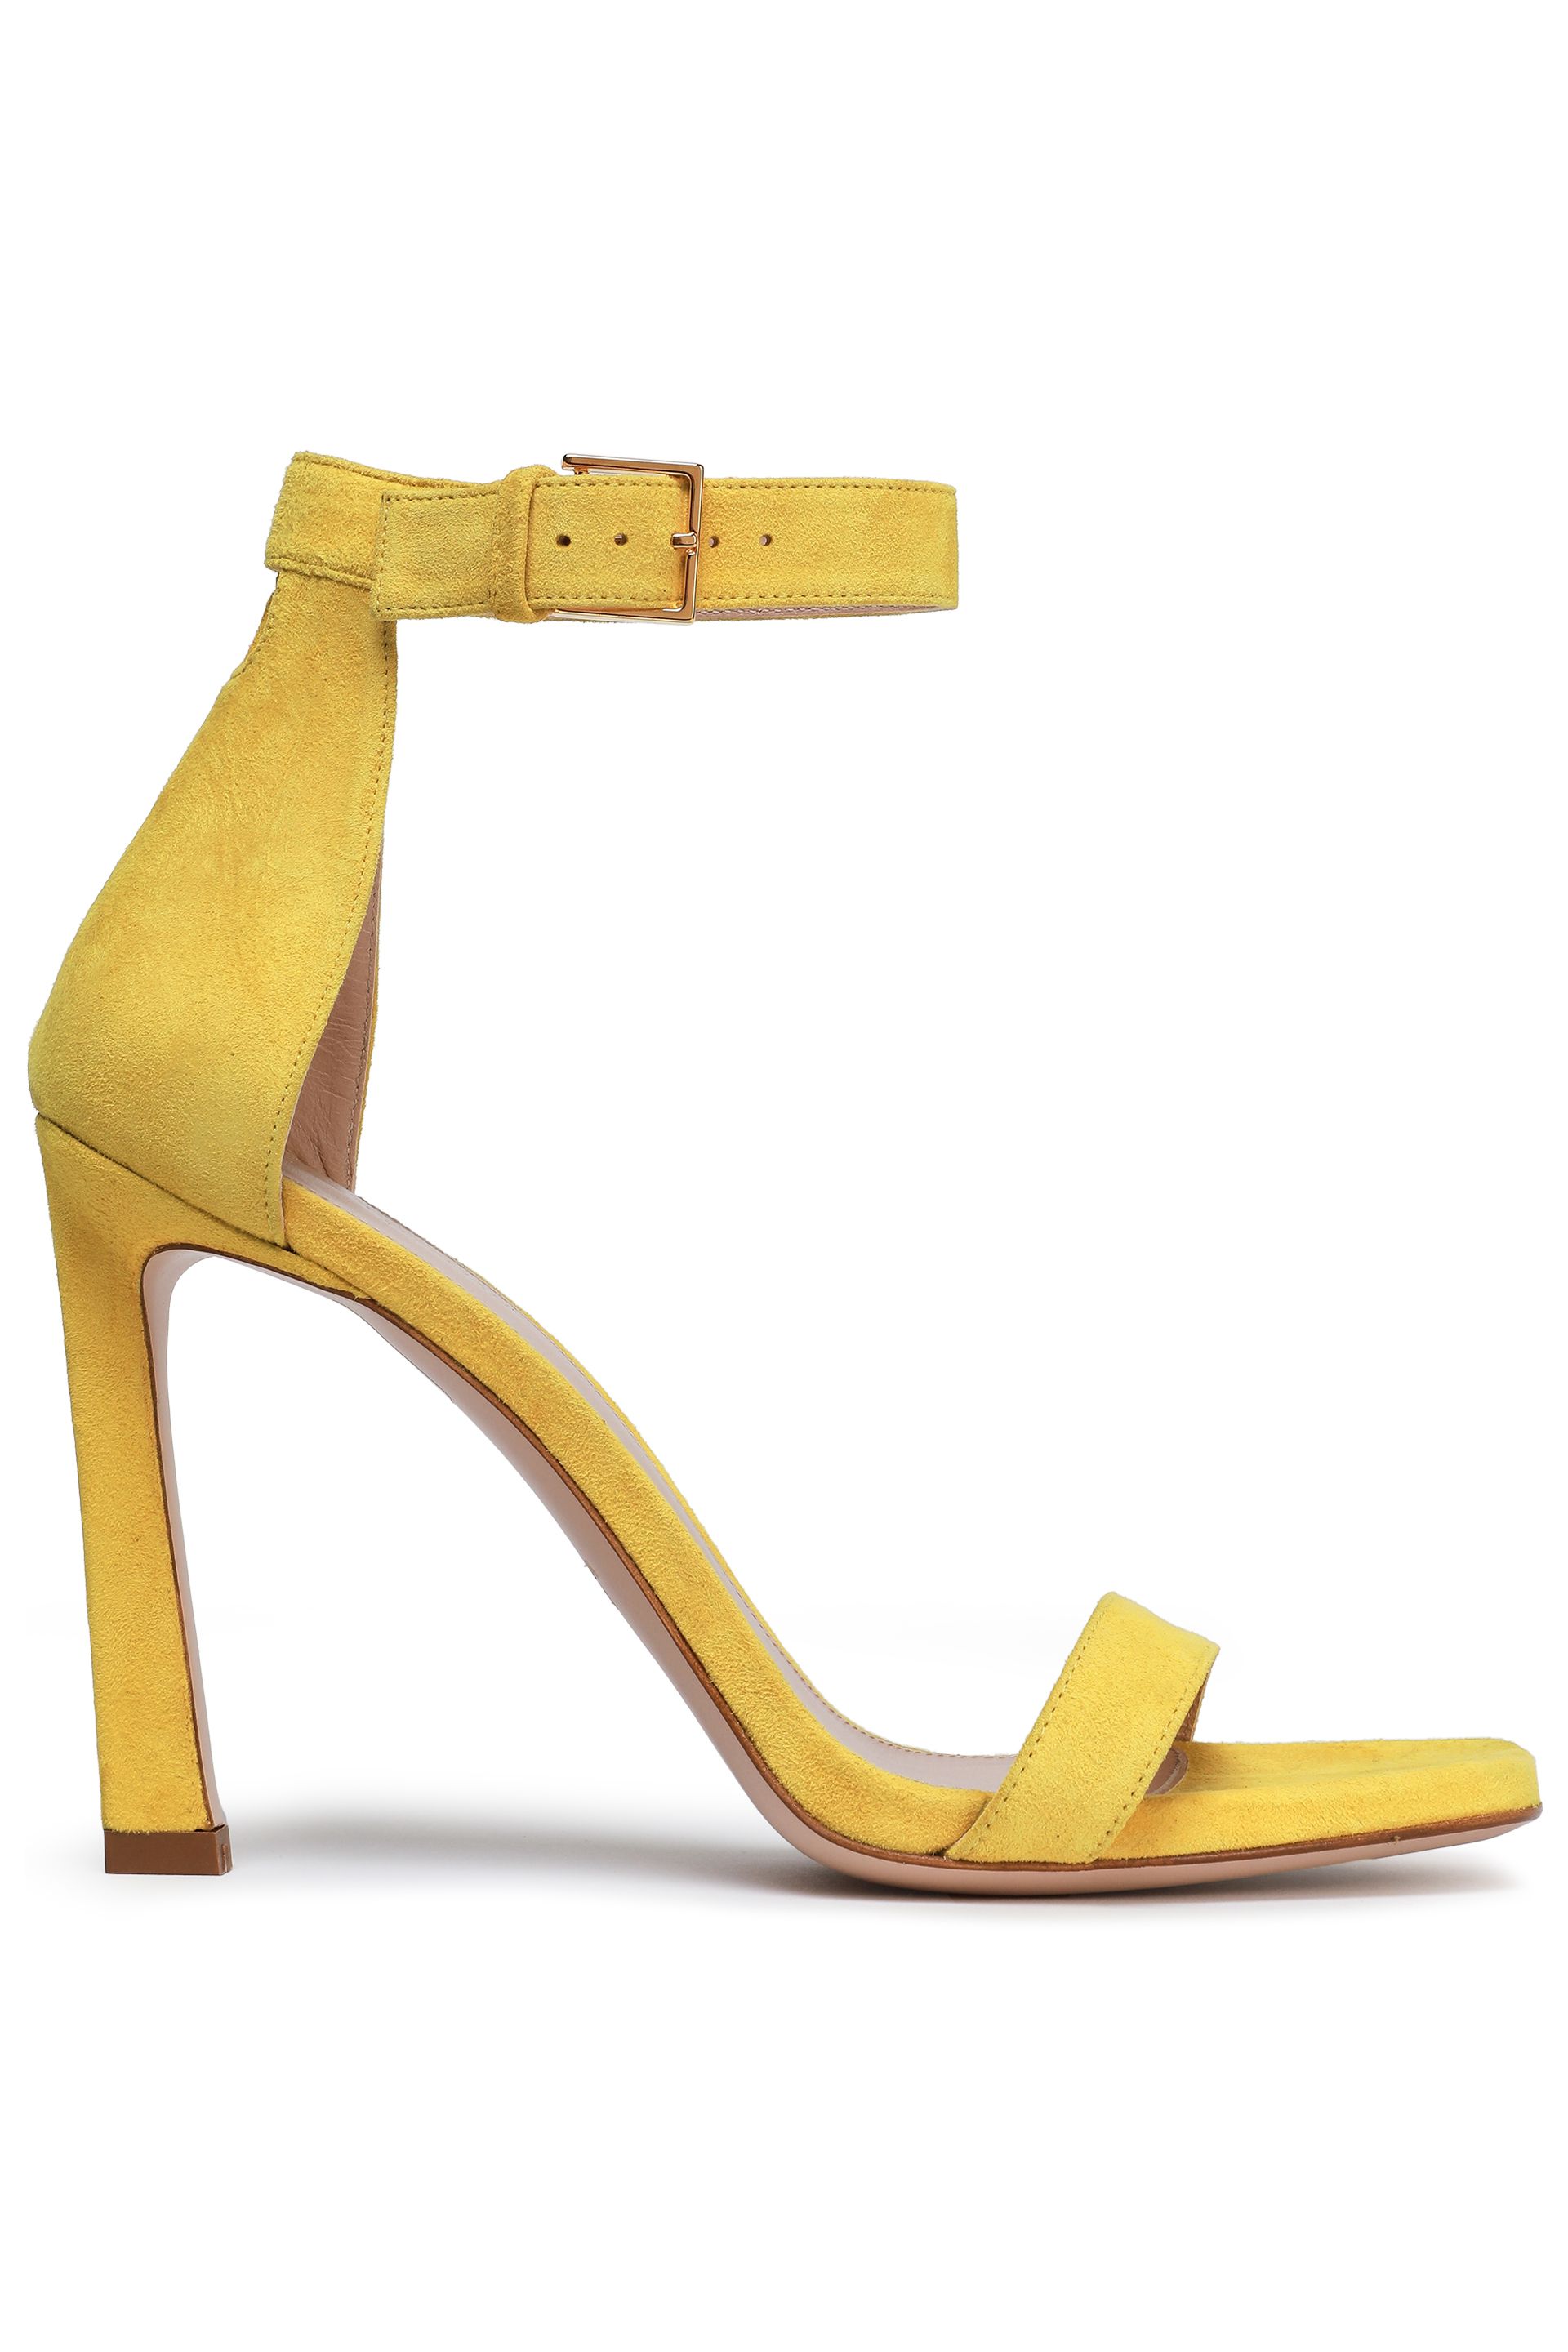 Stuart Weitzman | Sale up to 70% off | US | THE OUTNET